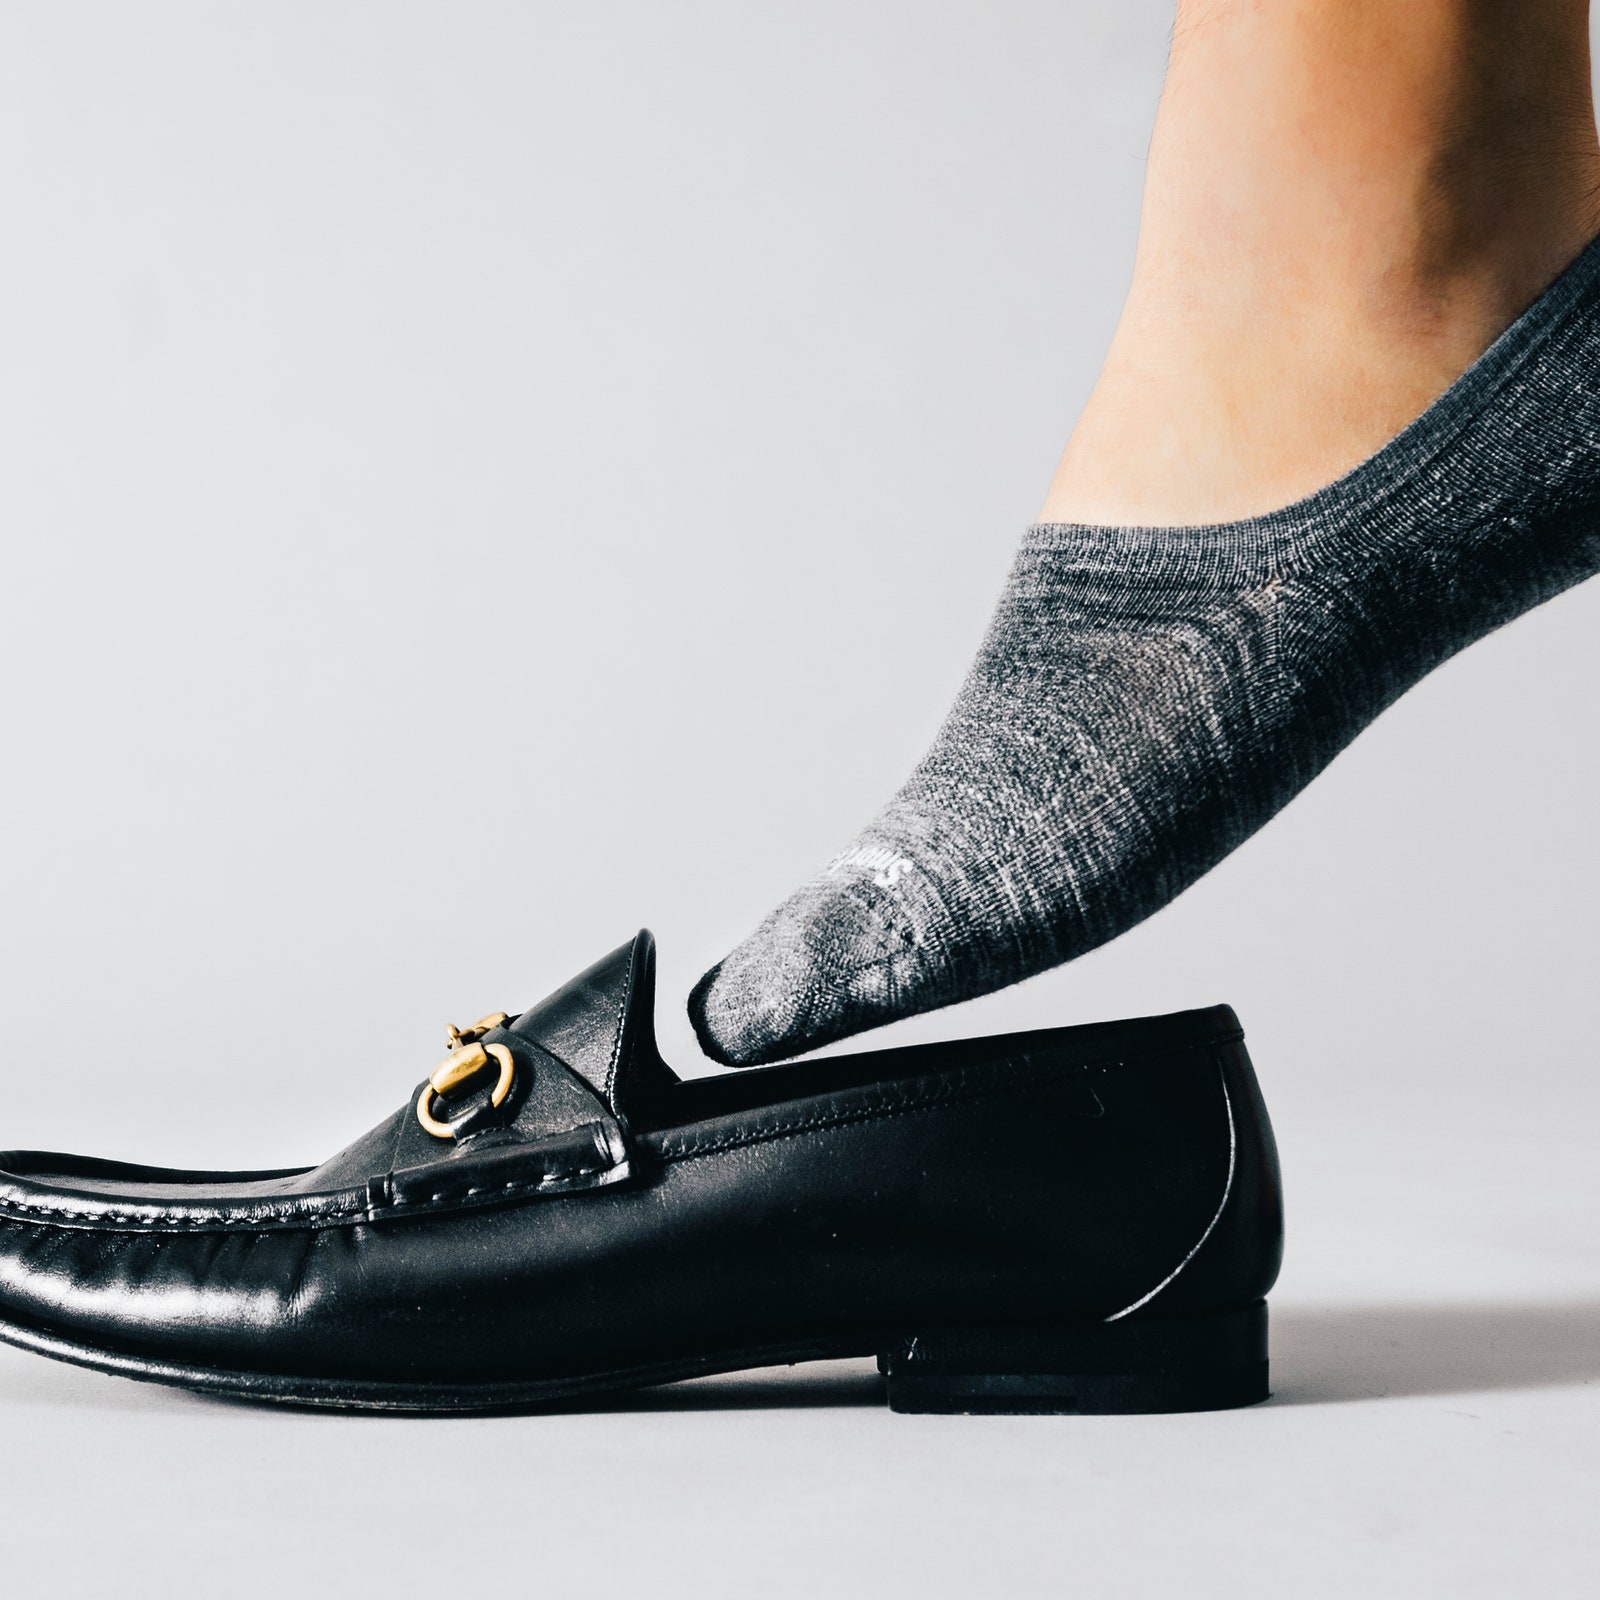 The Best No-Show Socks That'll Actually Stay on Your Feet